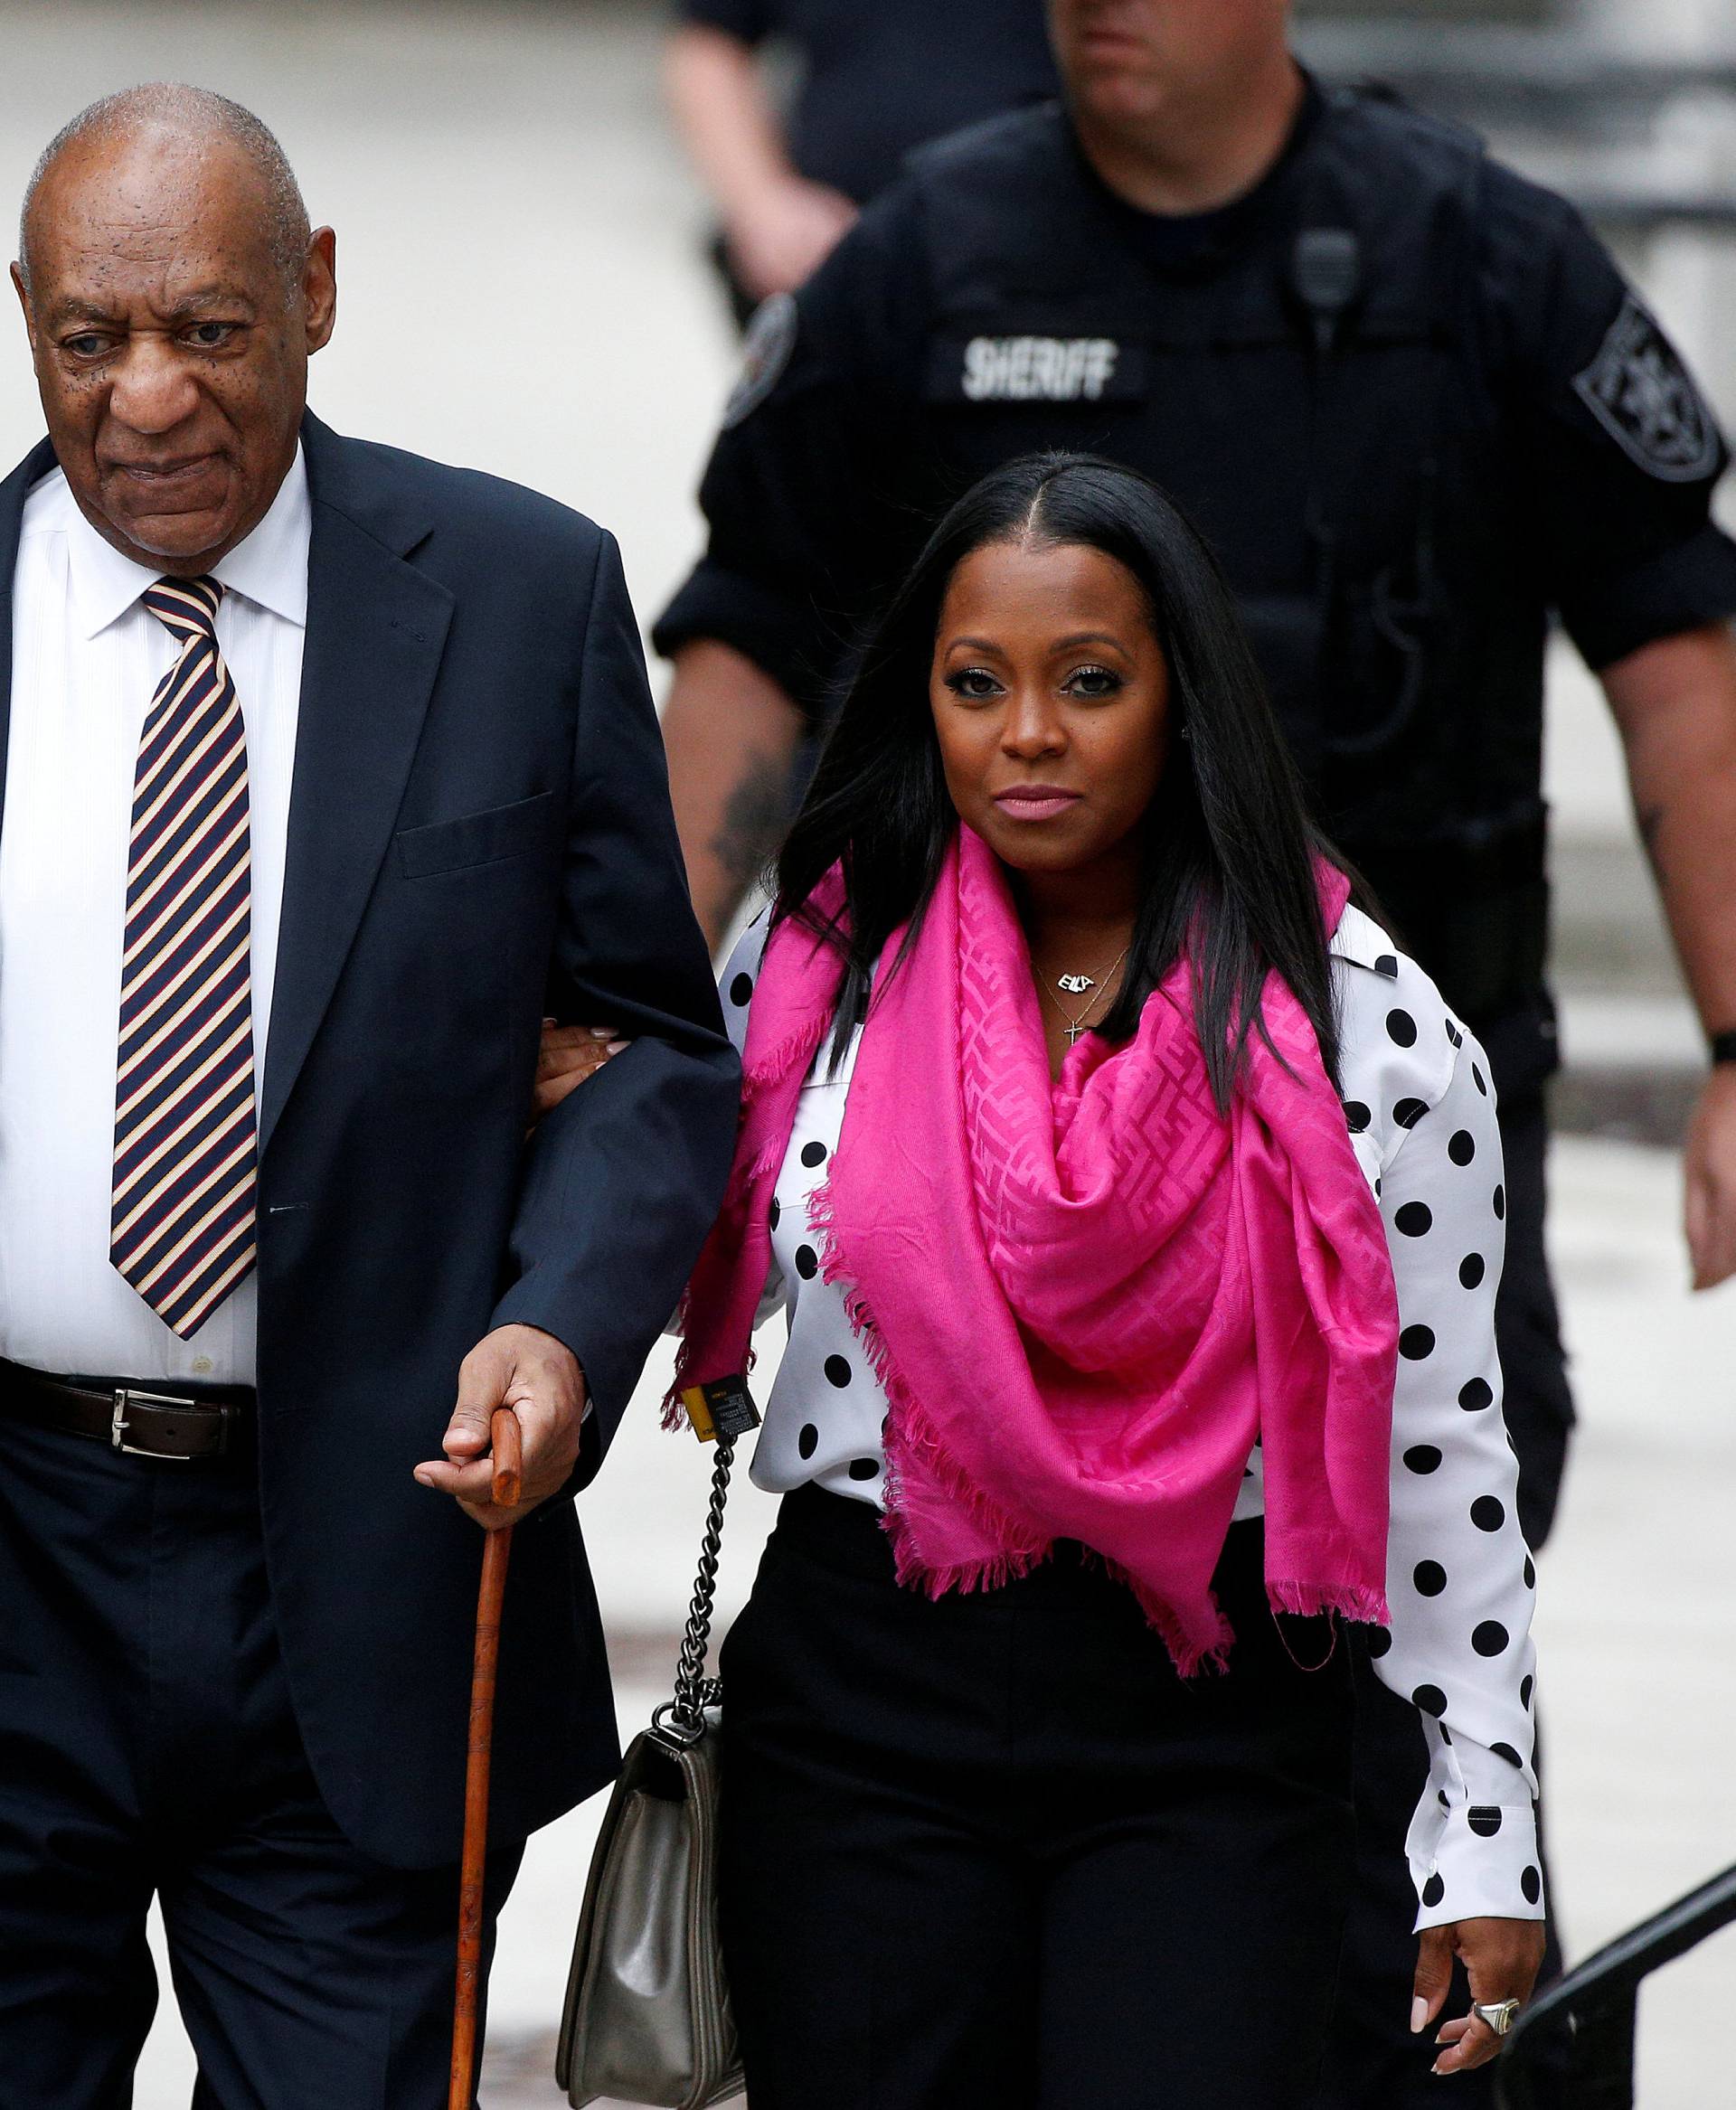 Actor and comedian Bill Cosby arrives for the first day of his sexual assault trial at the Montgomery County Courthouse in Norristown